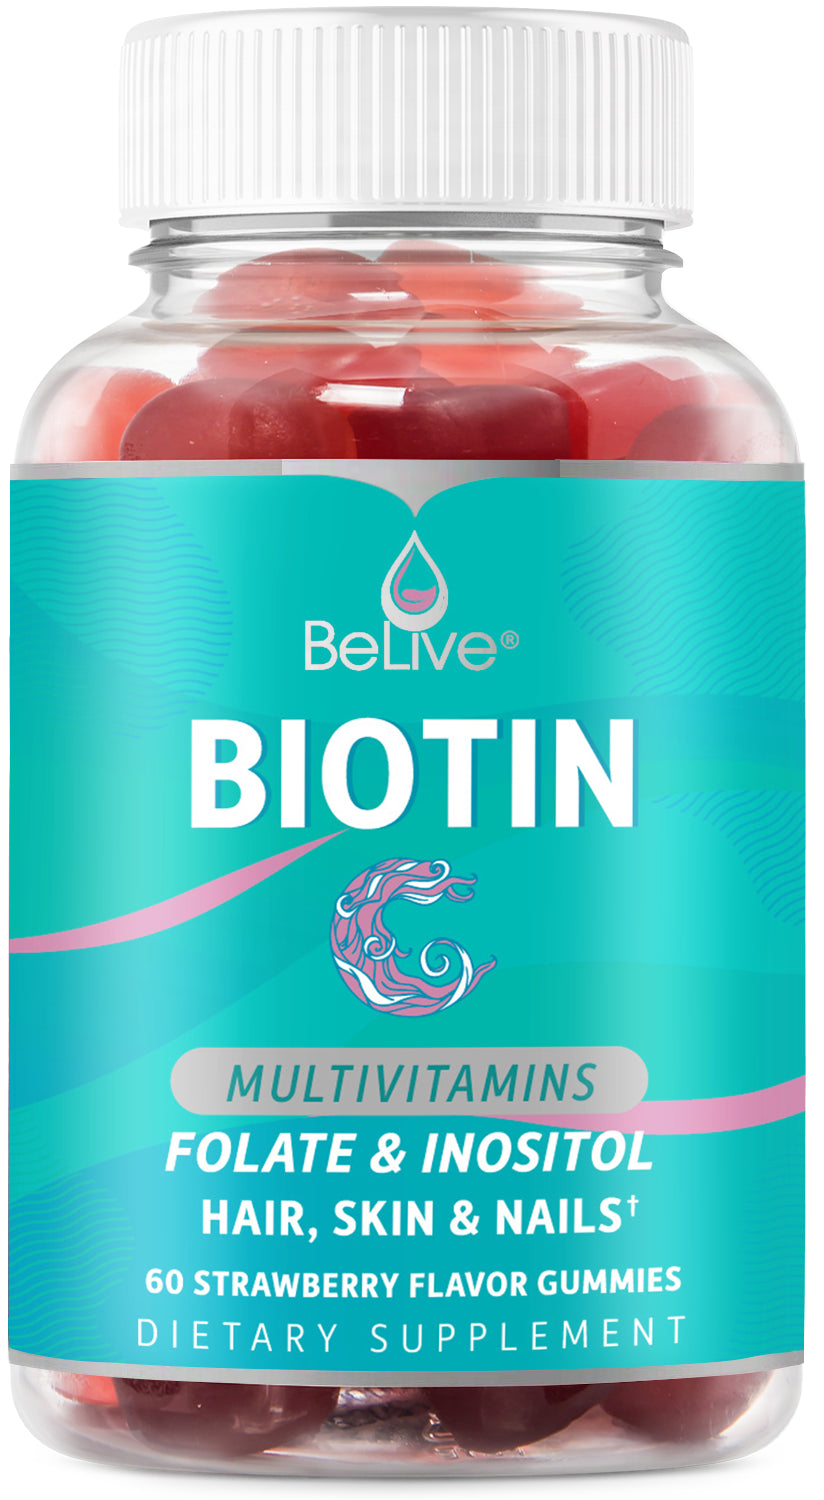 Belive Biotin Gummies with Multivitamins, Folate, Inositol – Supports Hair Growth, Healthy Skin & Nails – Vegan – Strawberry Flavor (60 Count)